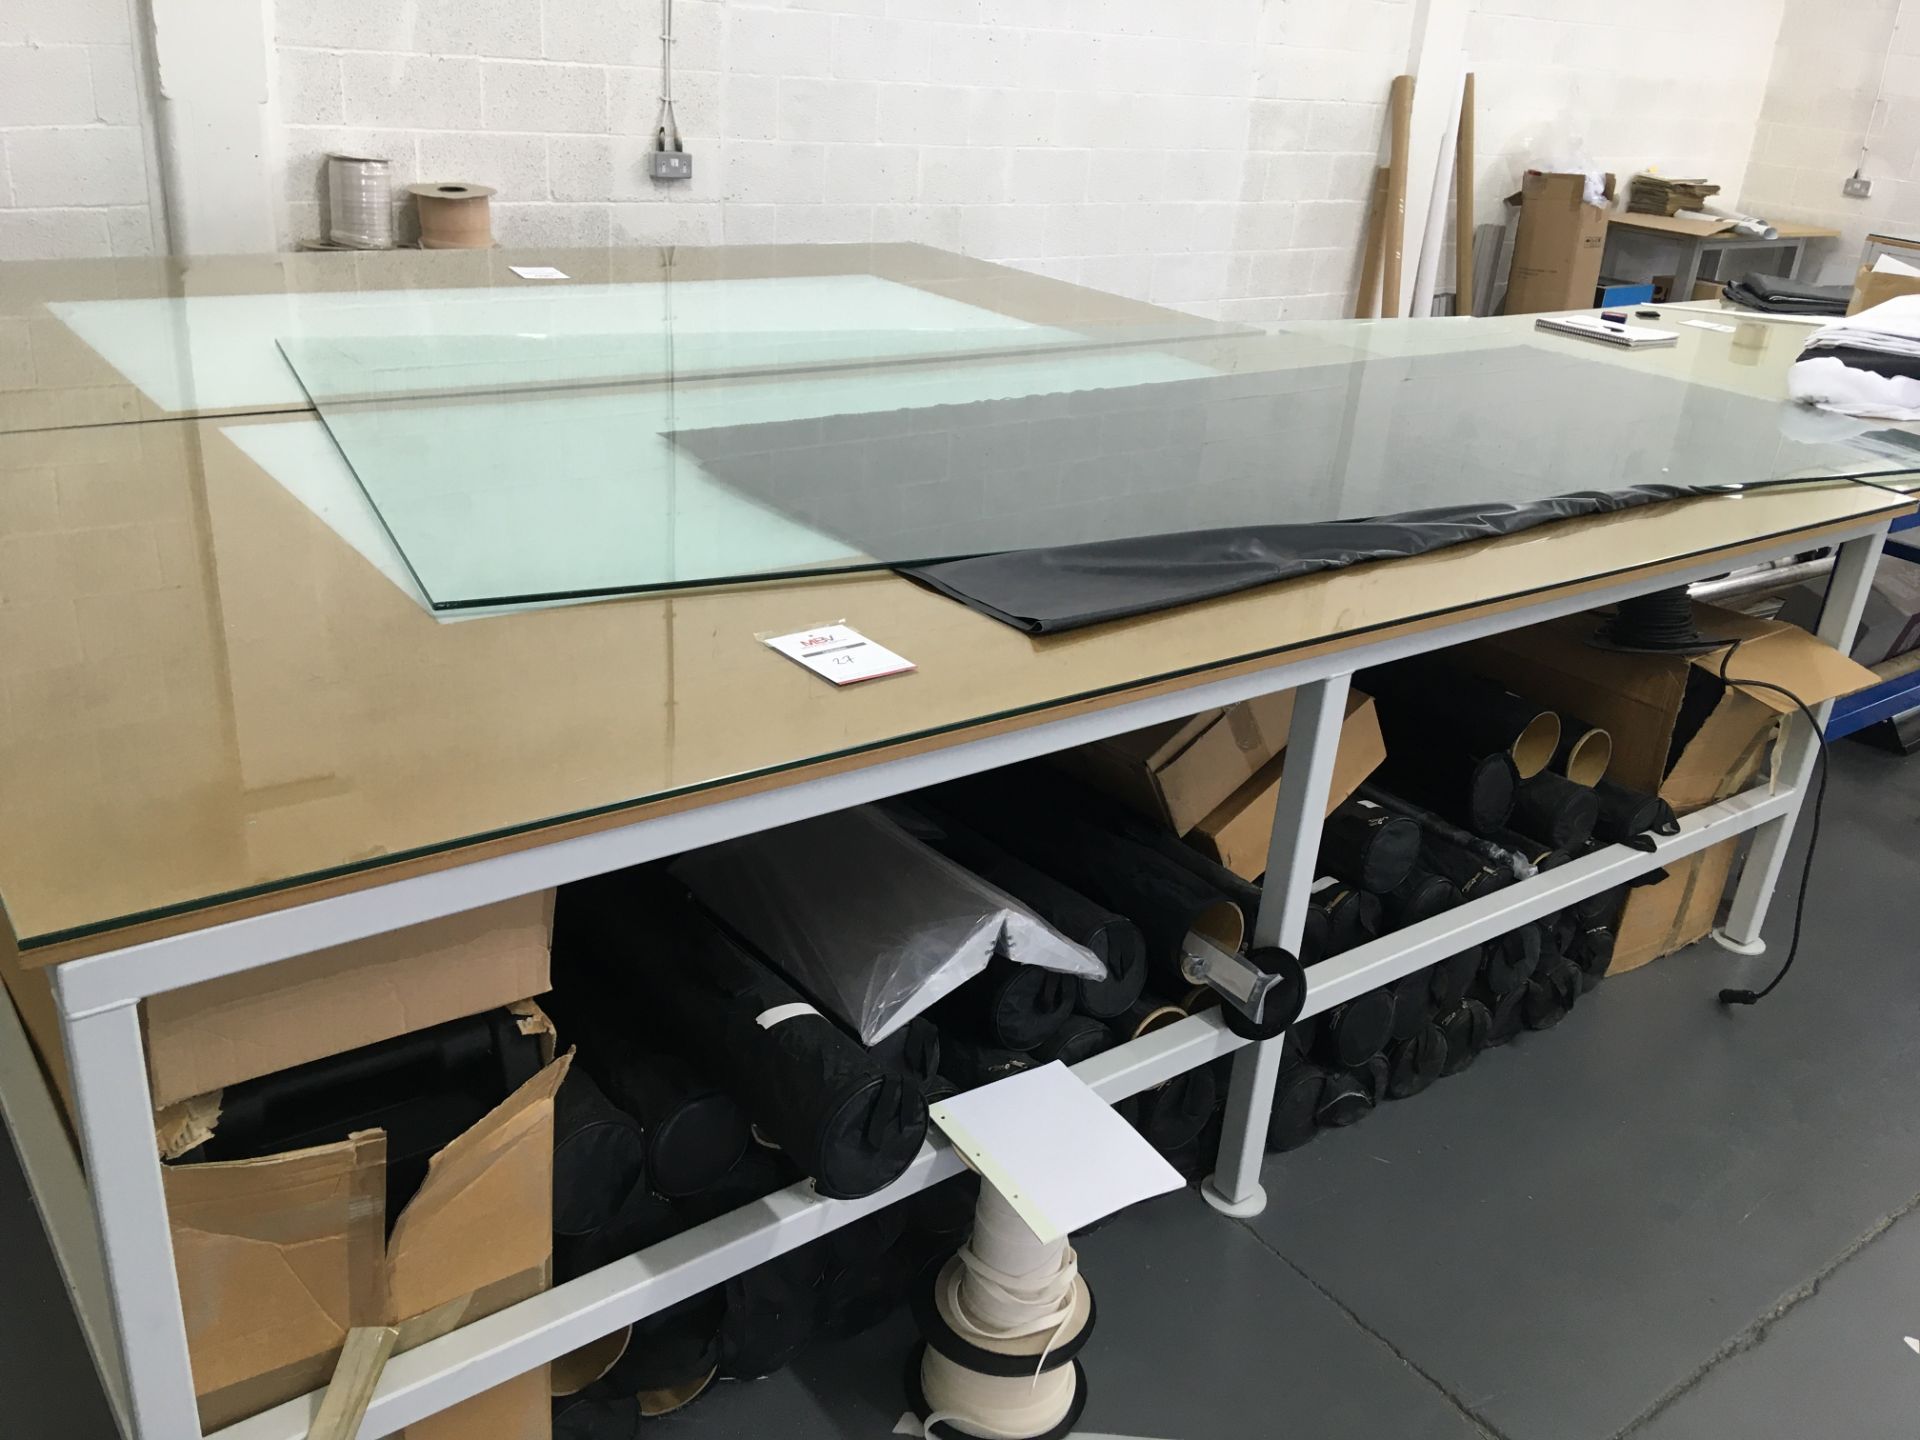 Heavy duty, glass topped alloy framed work table 3.0m x 1.5m - with integral light box